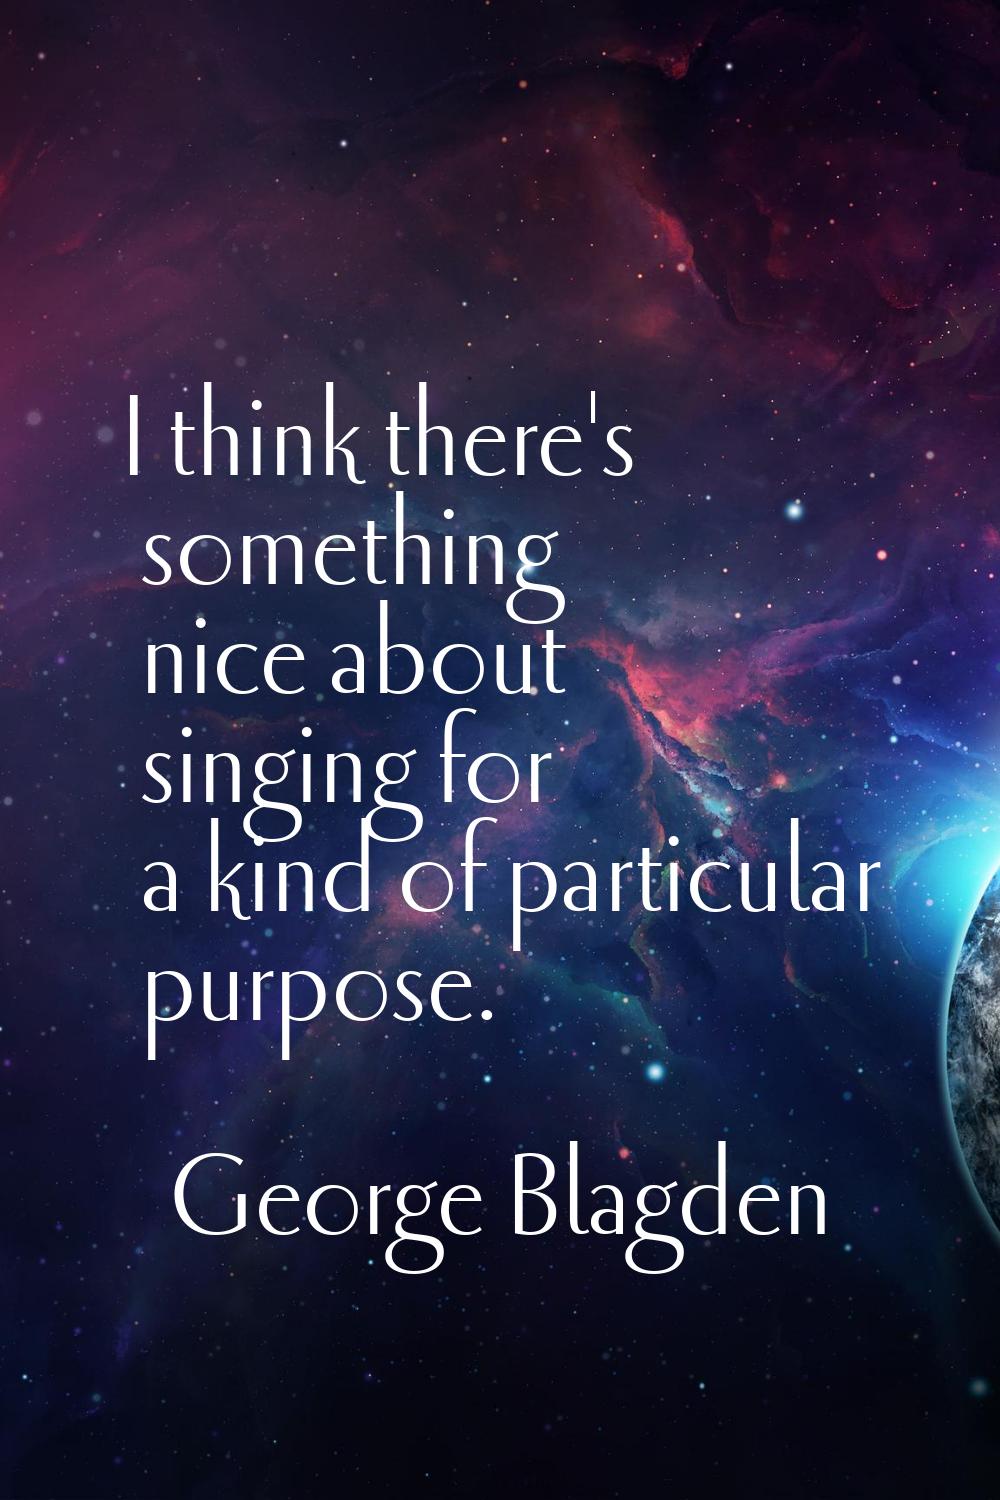 I think there's something nice about singing for a kind of particular purpose.